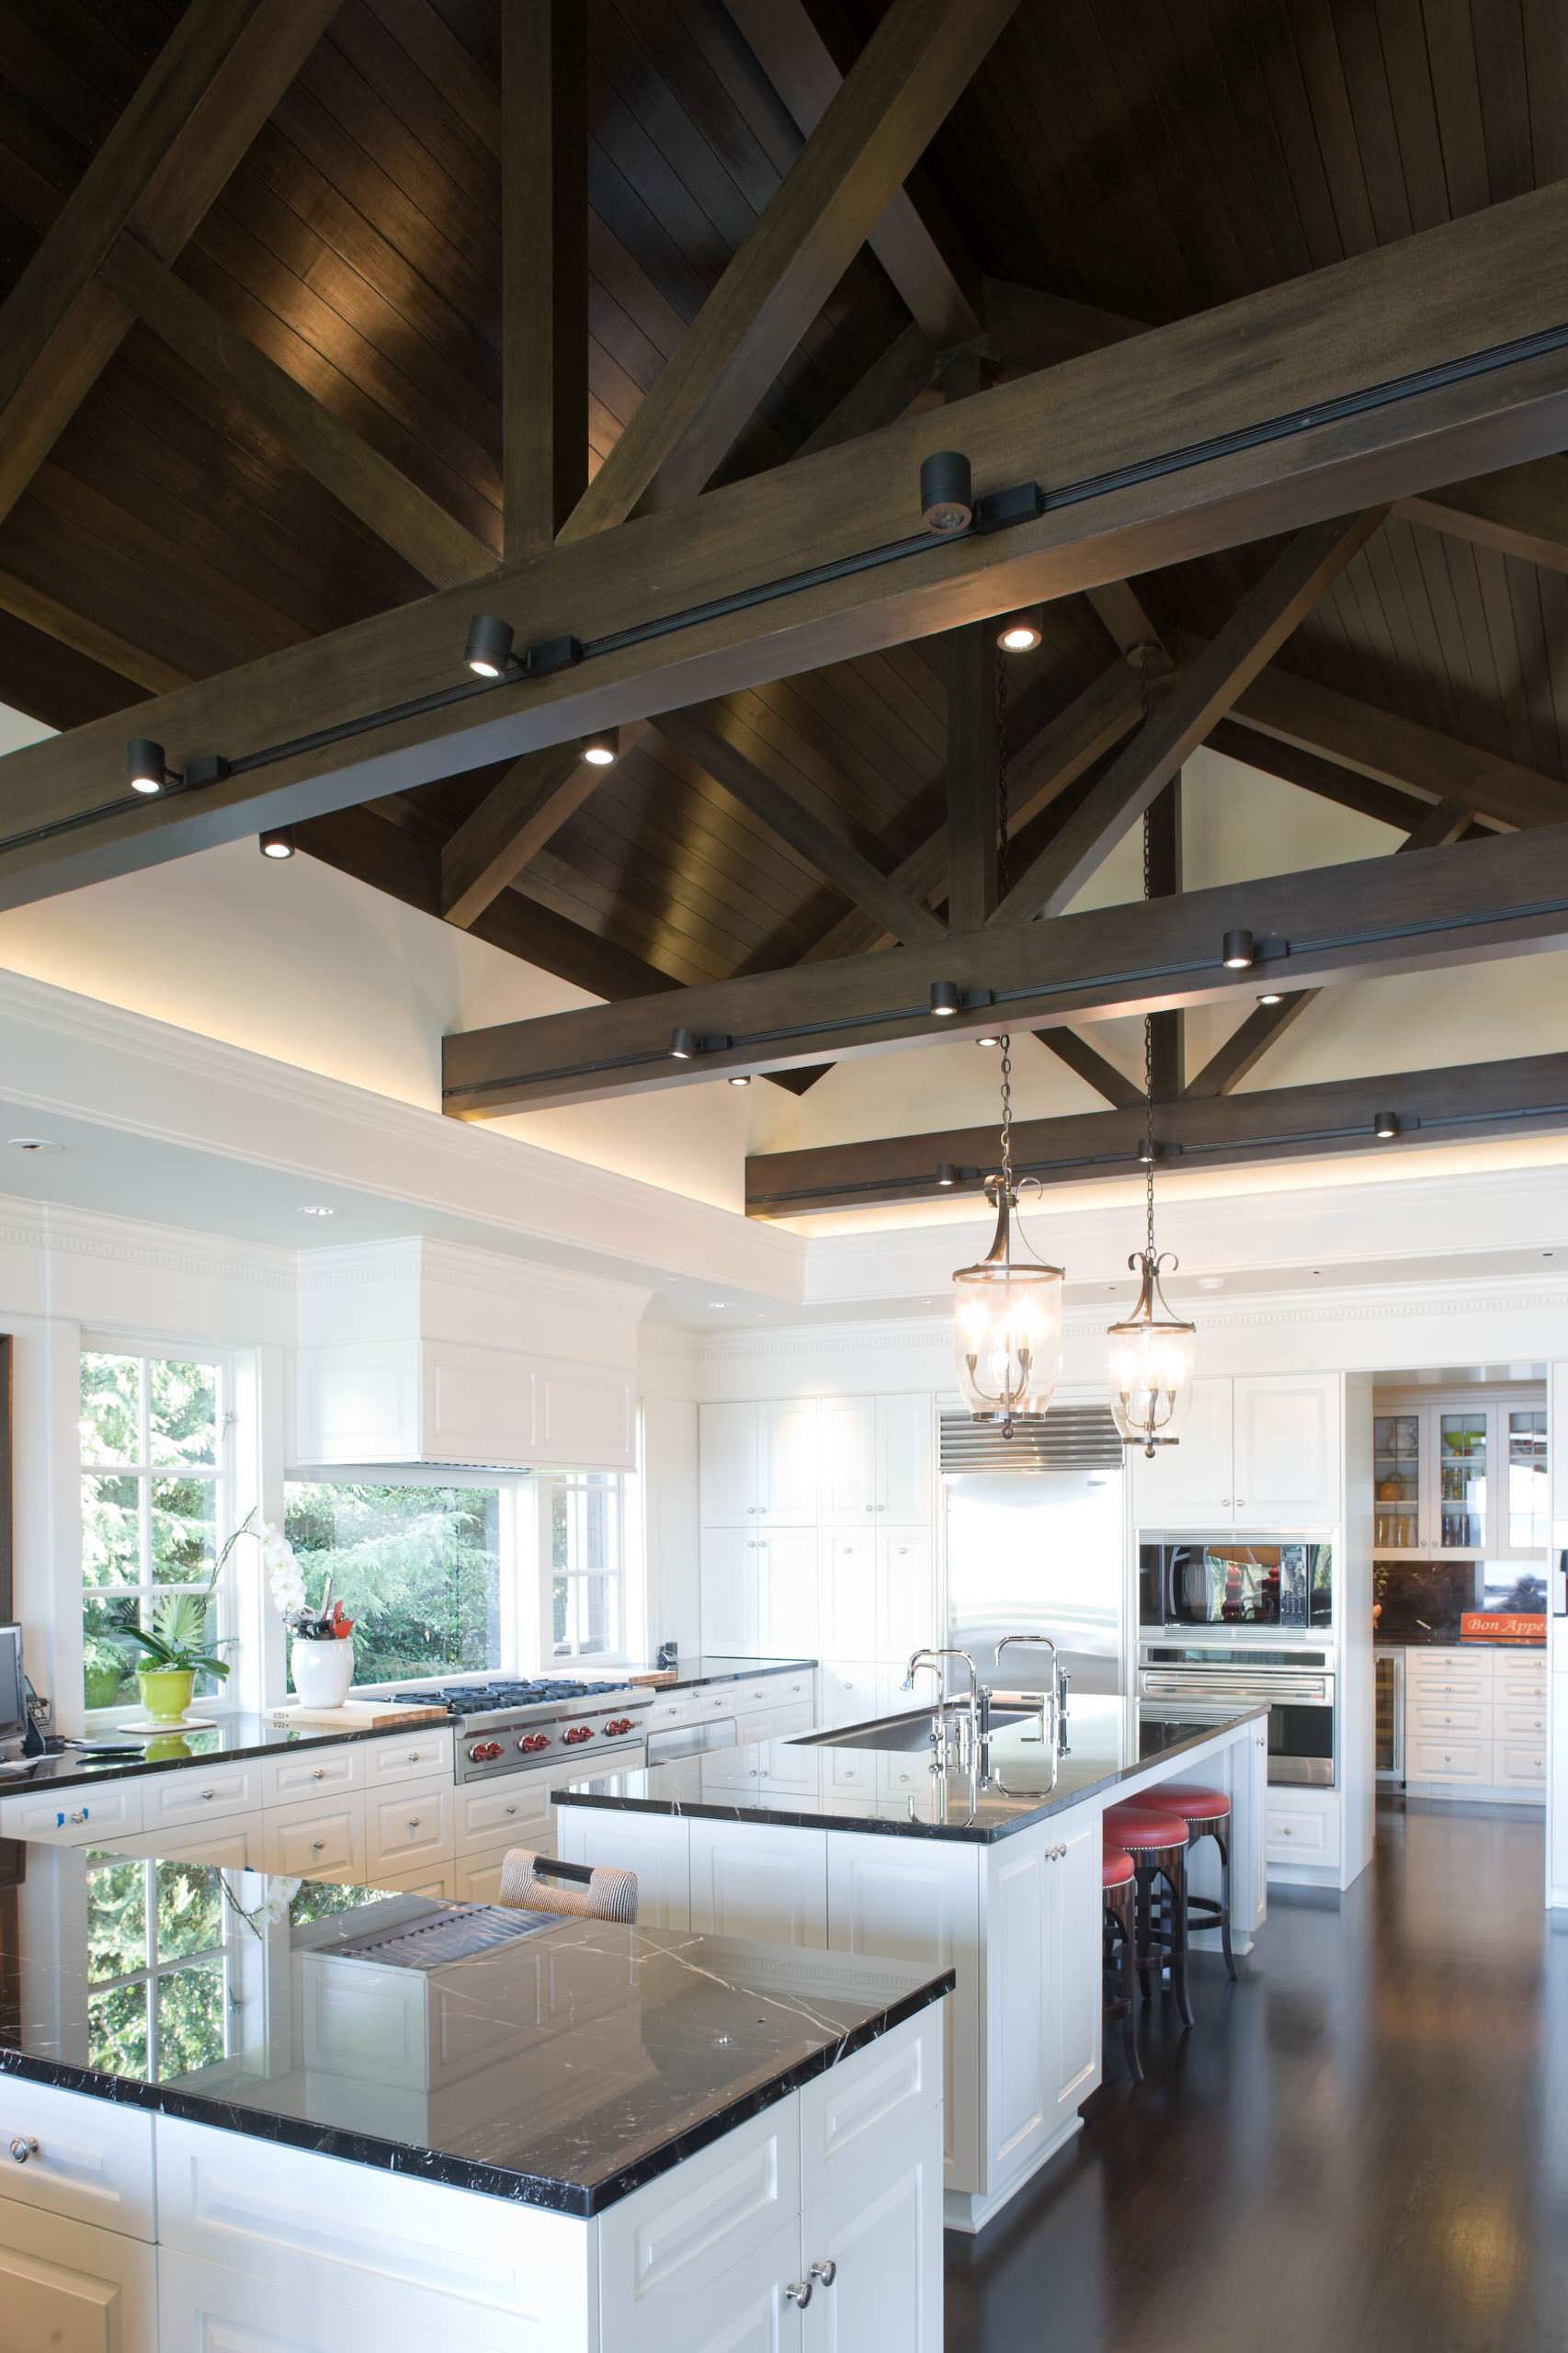 Lighting Ideas For Exposed Ceiling Beams The Best Picture Of Beam